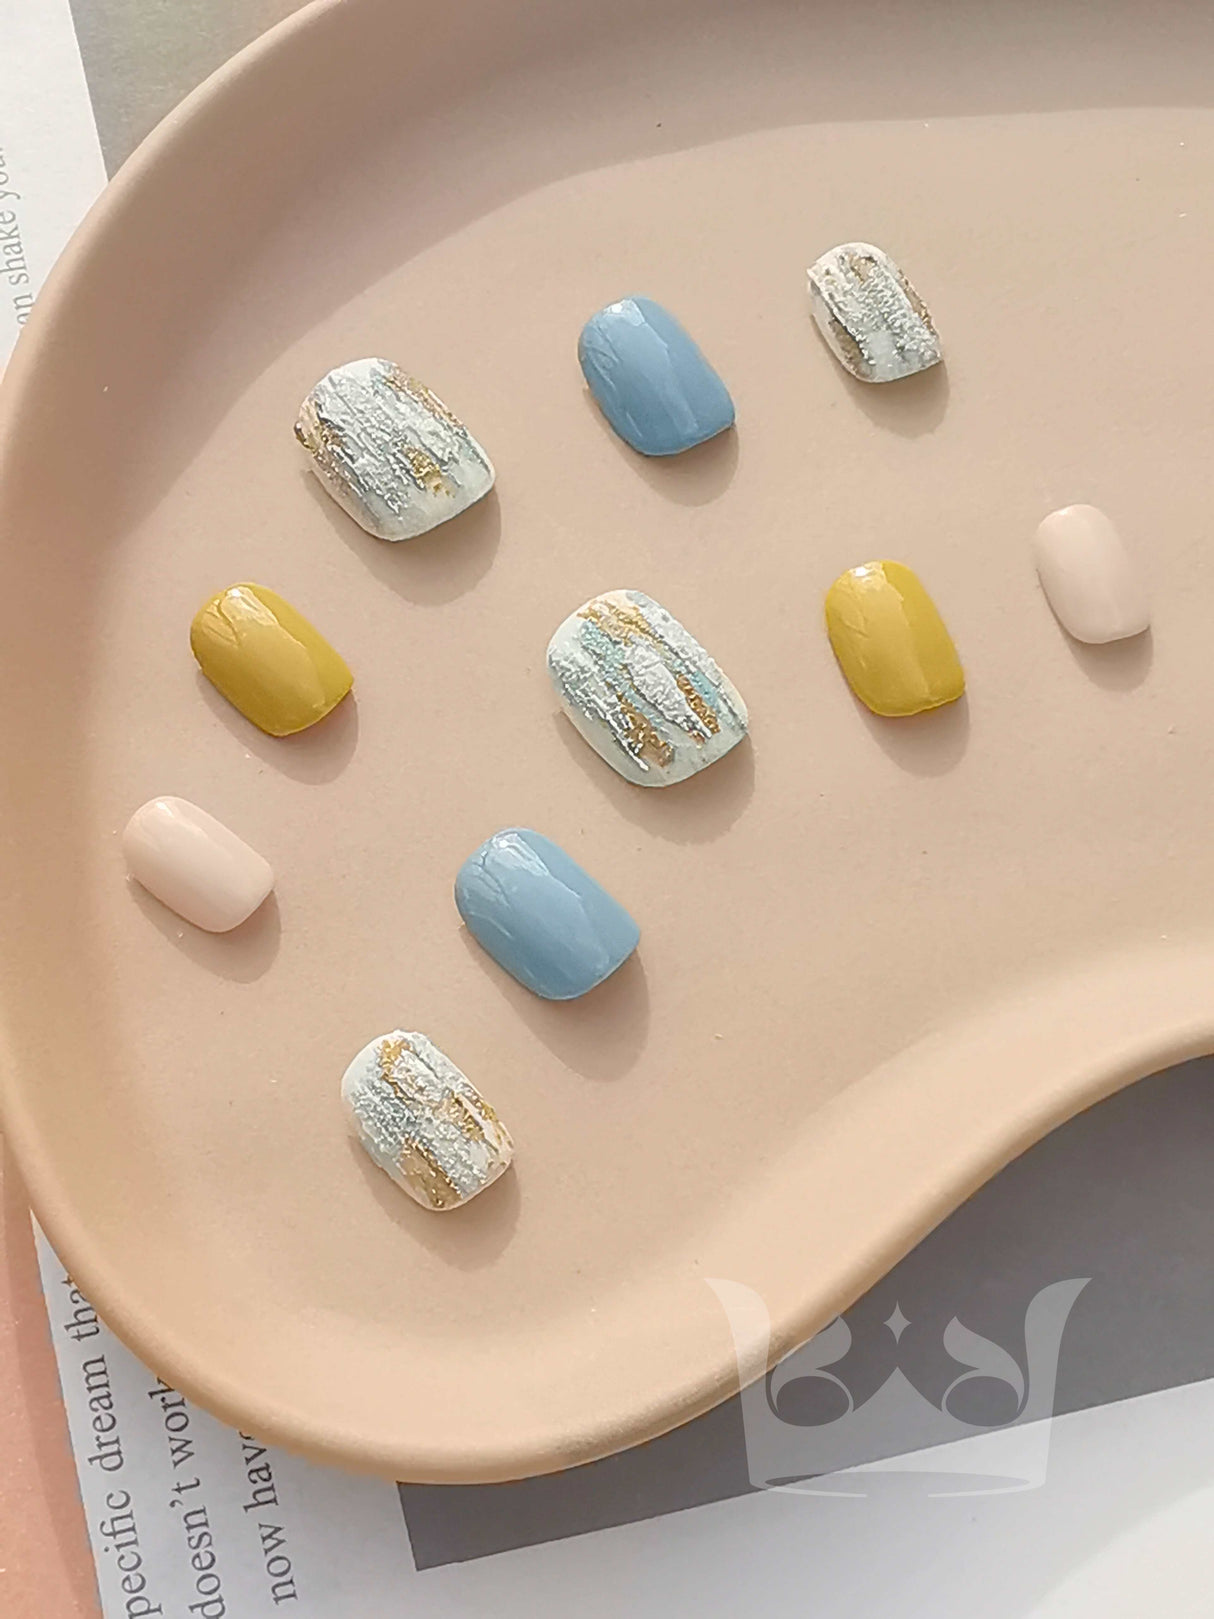 Press-ons feature round shapes, pastel watercolor colors, textured, and minimalist style. Monet's painting inspired nail design. 